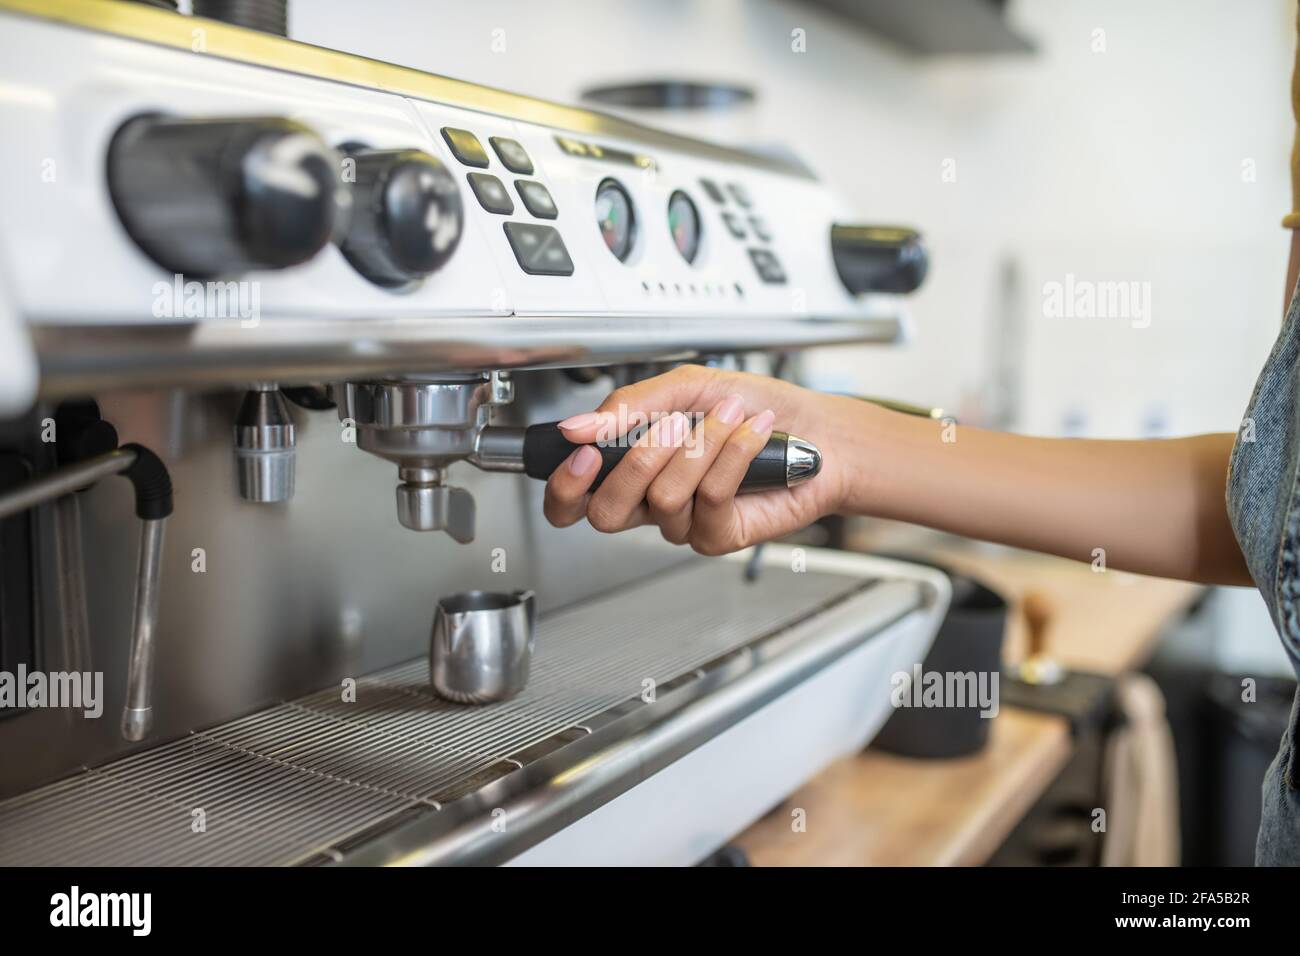 Womans hand holding holder of coffee machine Stock Photo